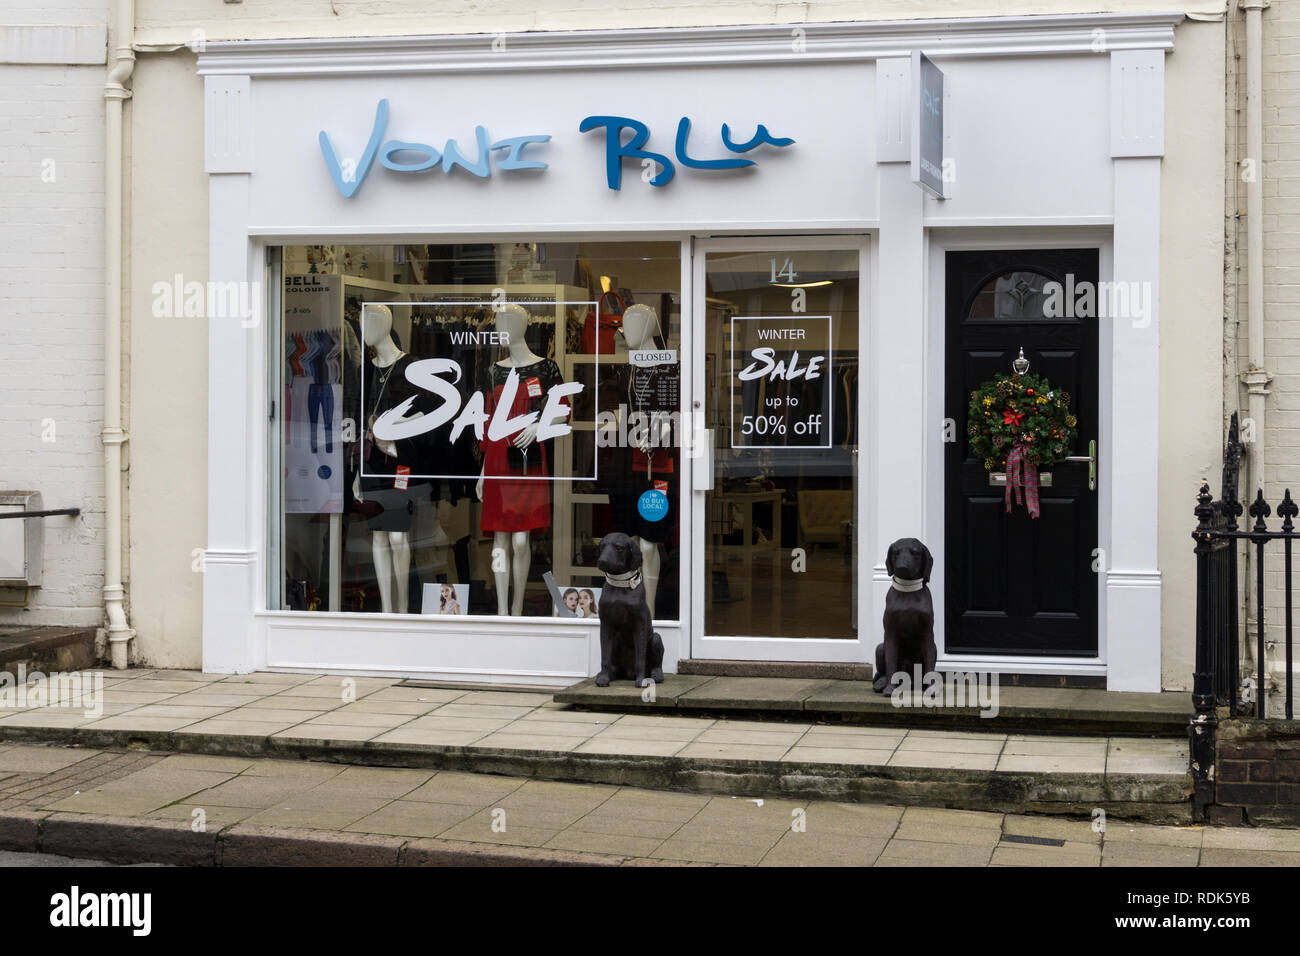 Voni Blu, a ladies fashion boutique, Northampton, UK; note the two stone dogs guarding the door. Stock Photo